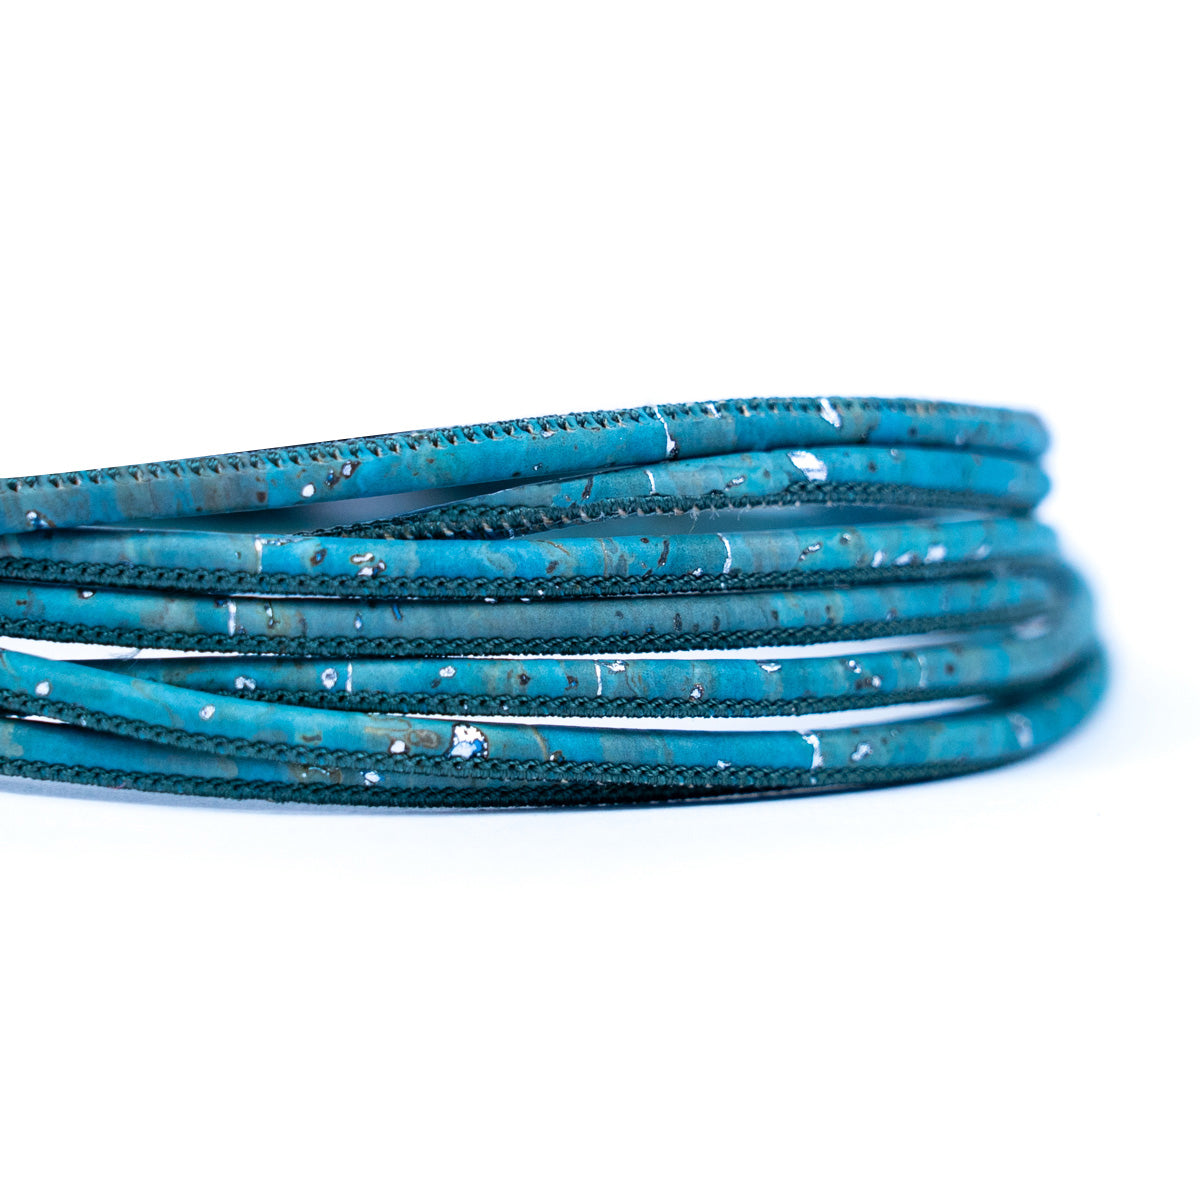 10 meters of 3MM Round Turquoise w/ Silver Cork Cord COR-632